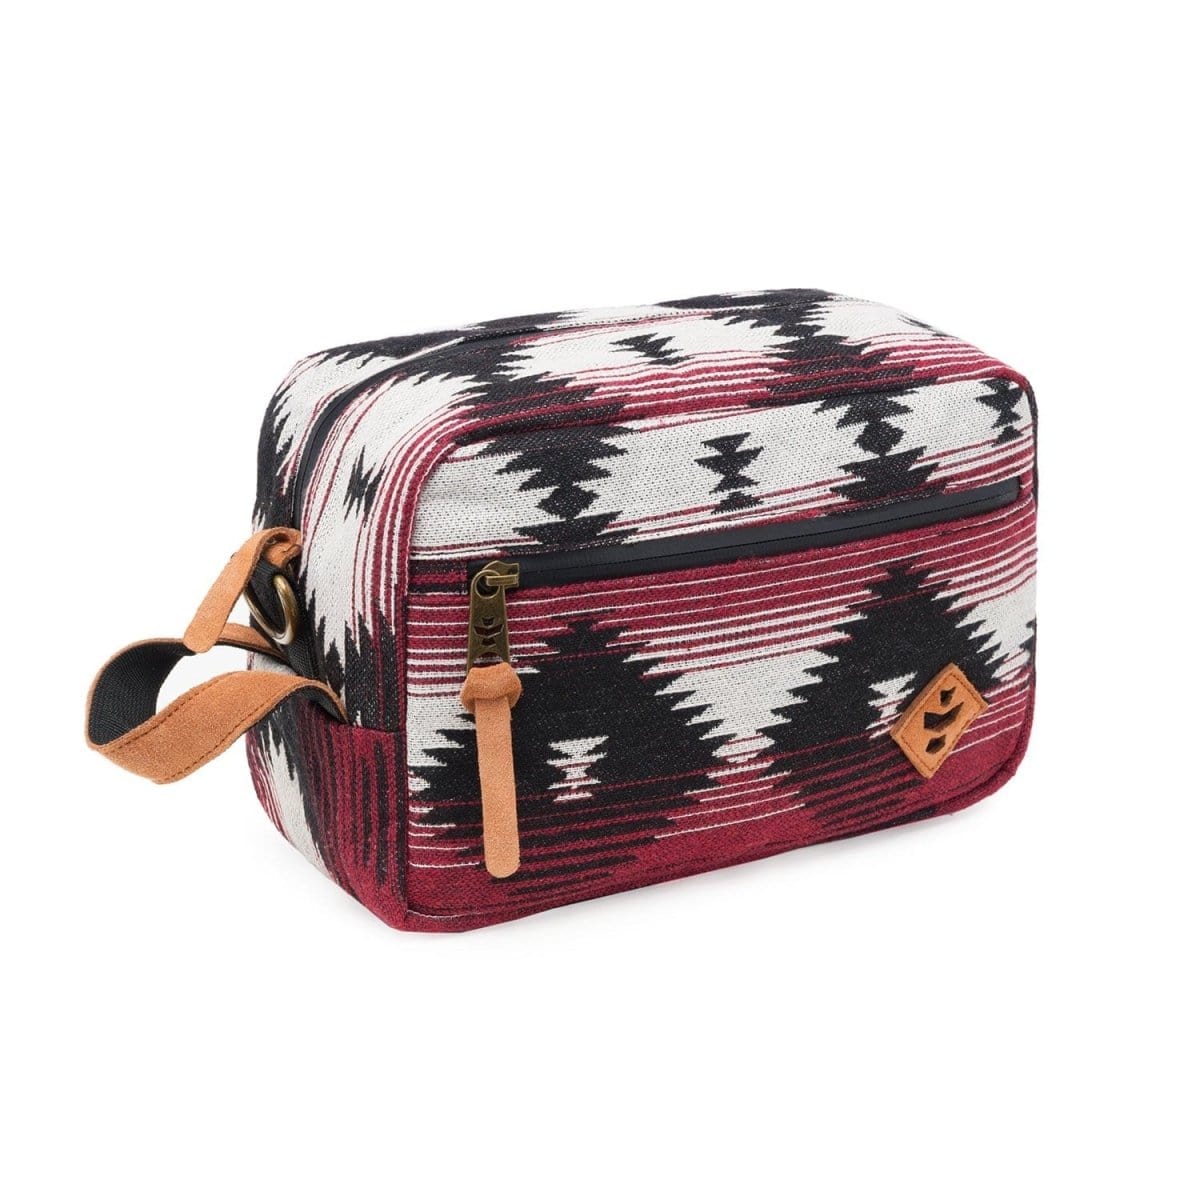 Revelry Supply Travel Bag Maroon Pattern The Stowaway - Smell Proof Toiletry Kit